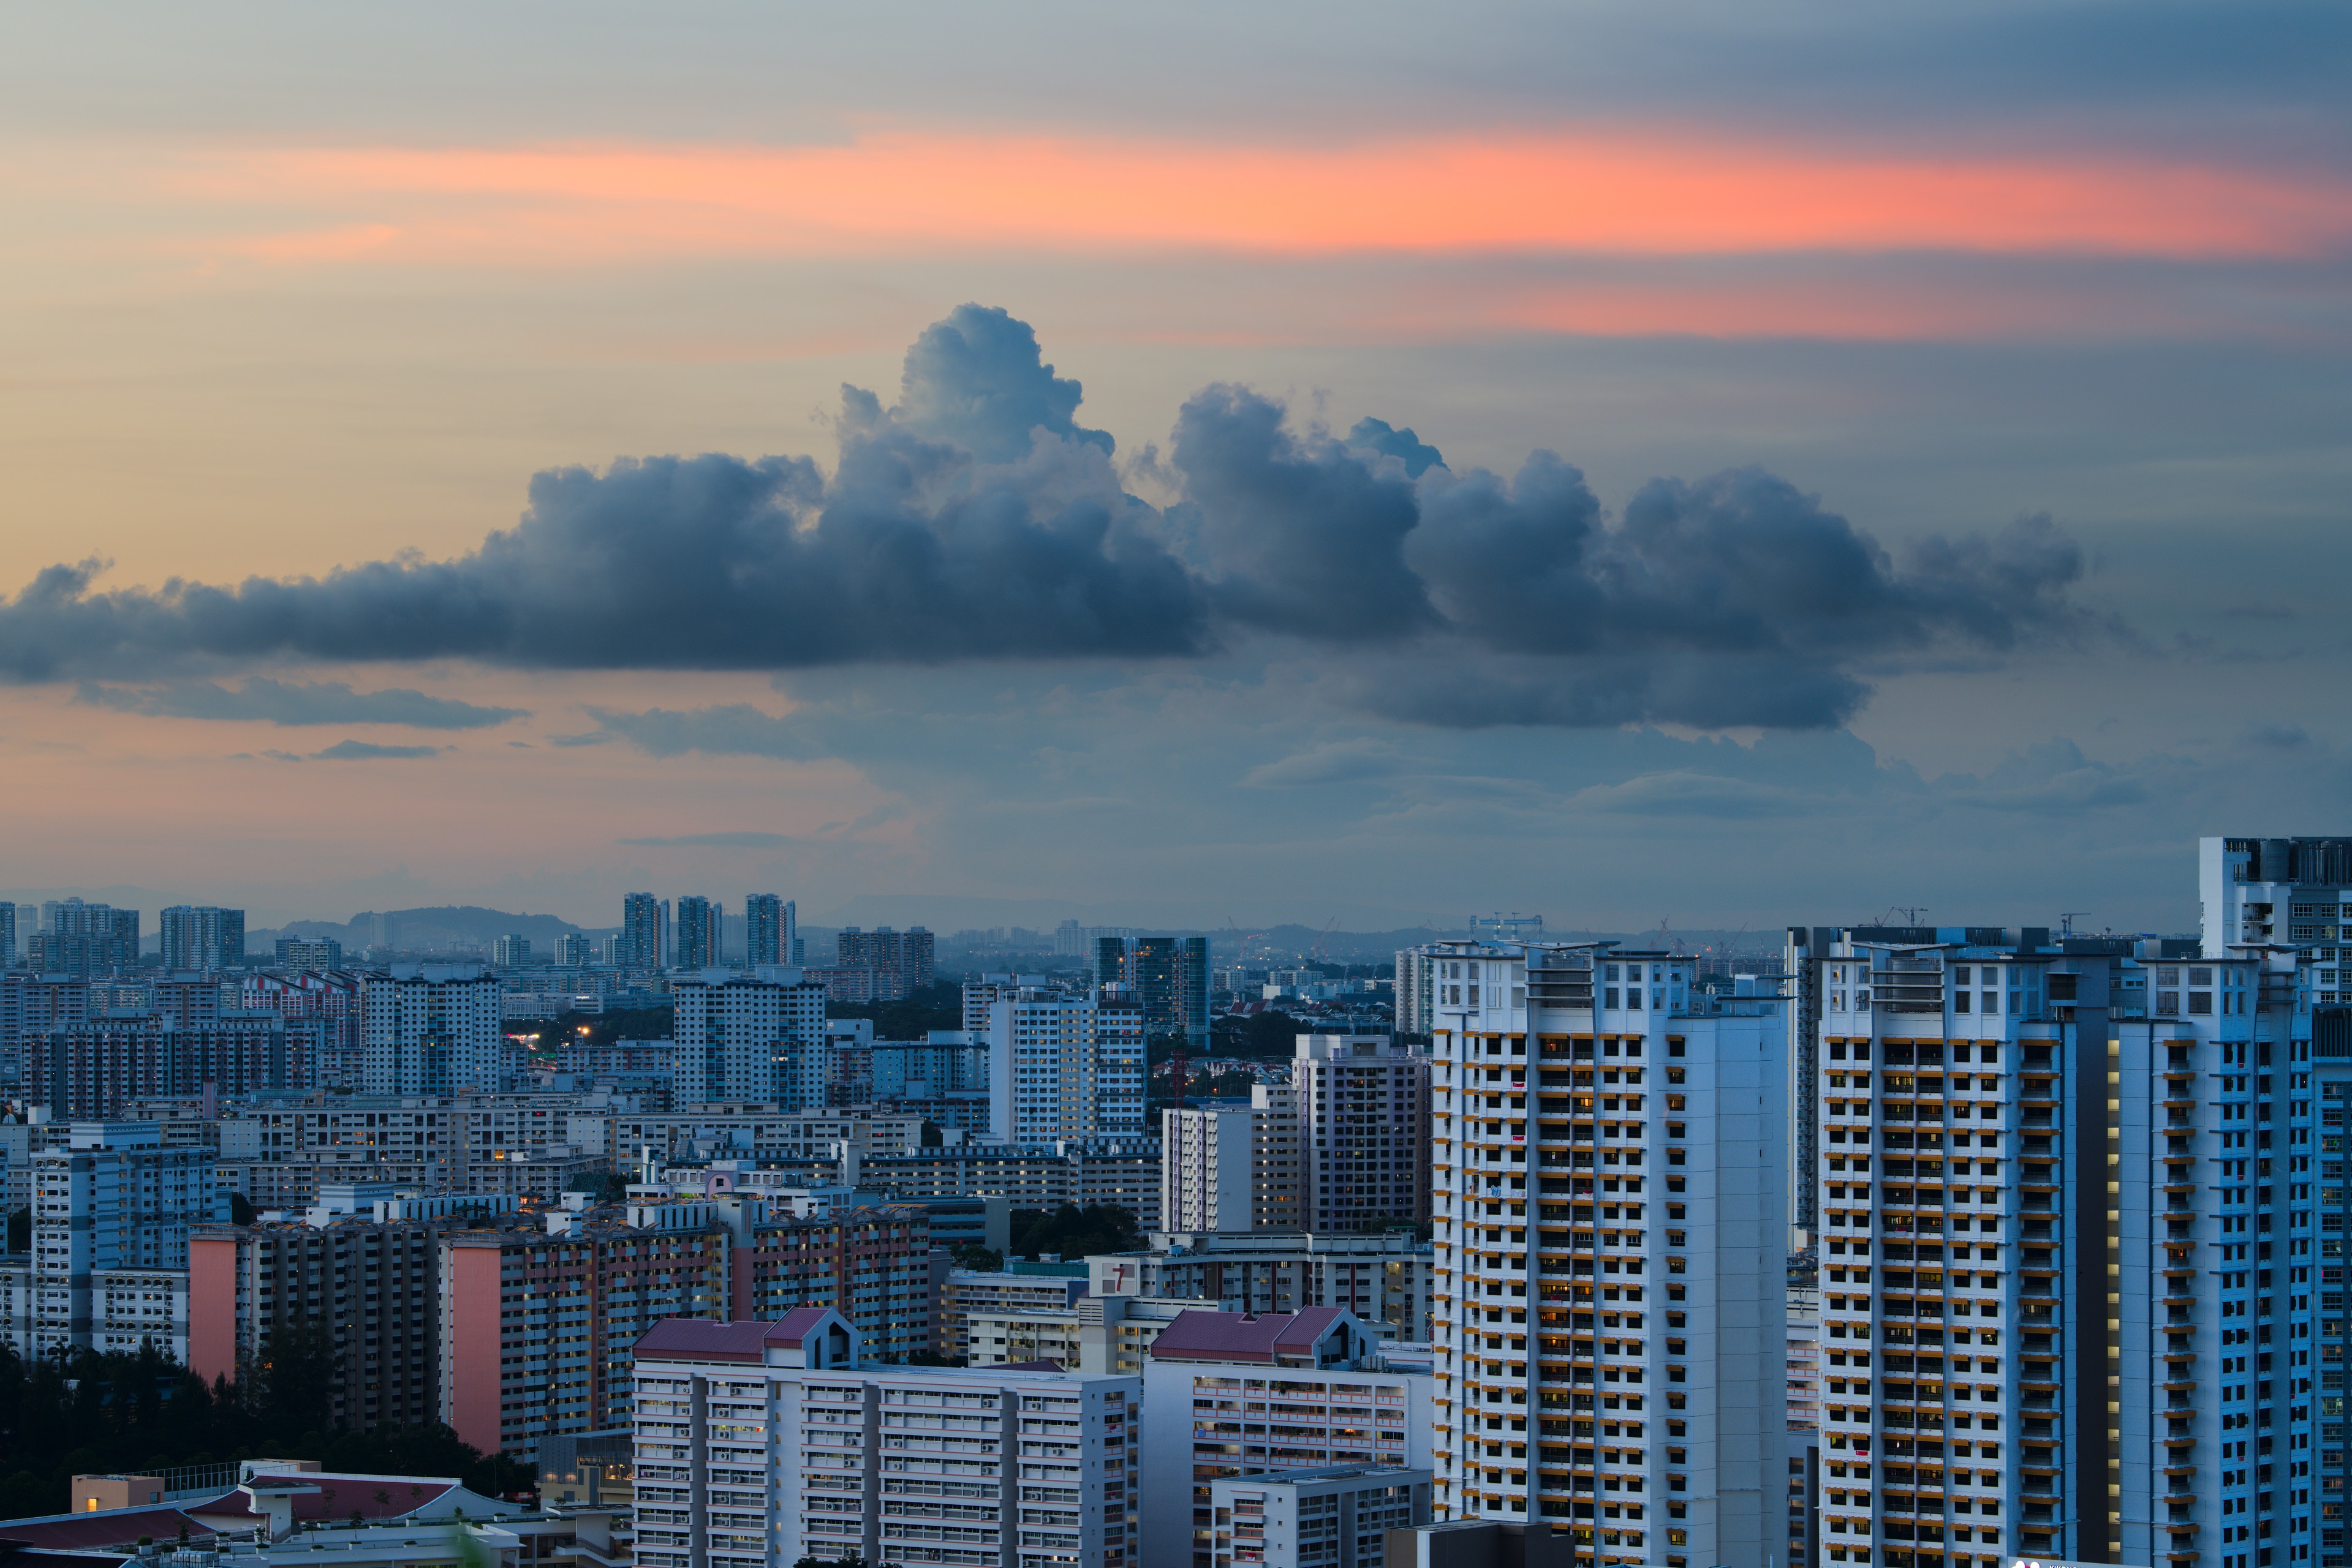 cities, sunset, architecture, clouds, city, skyscraper, building